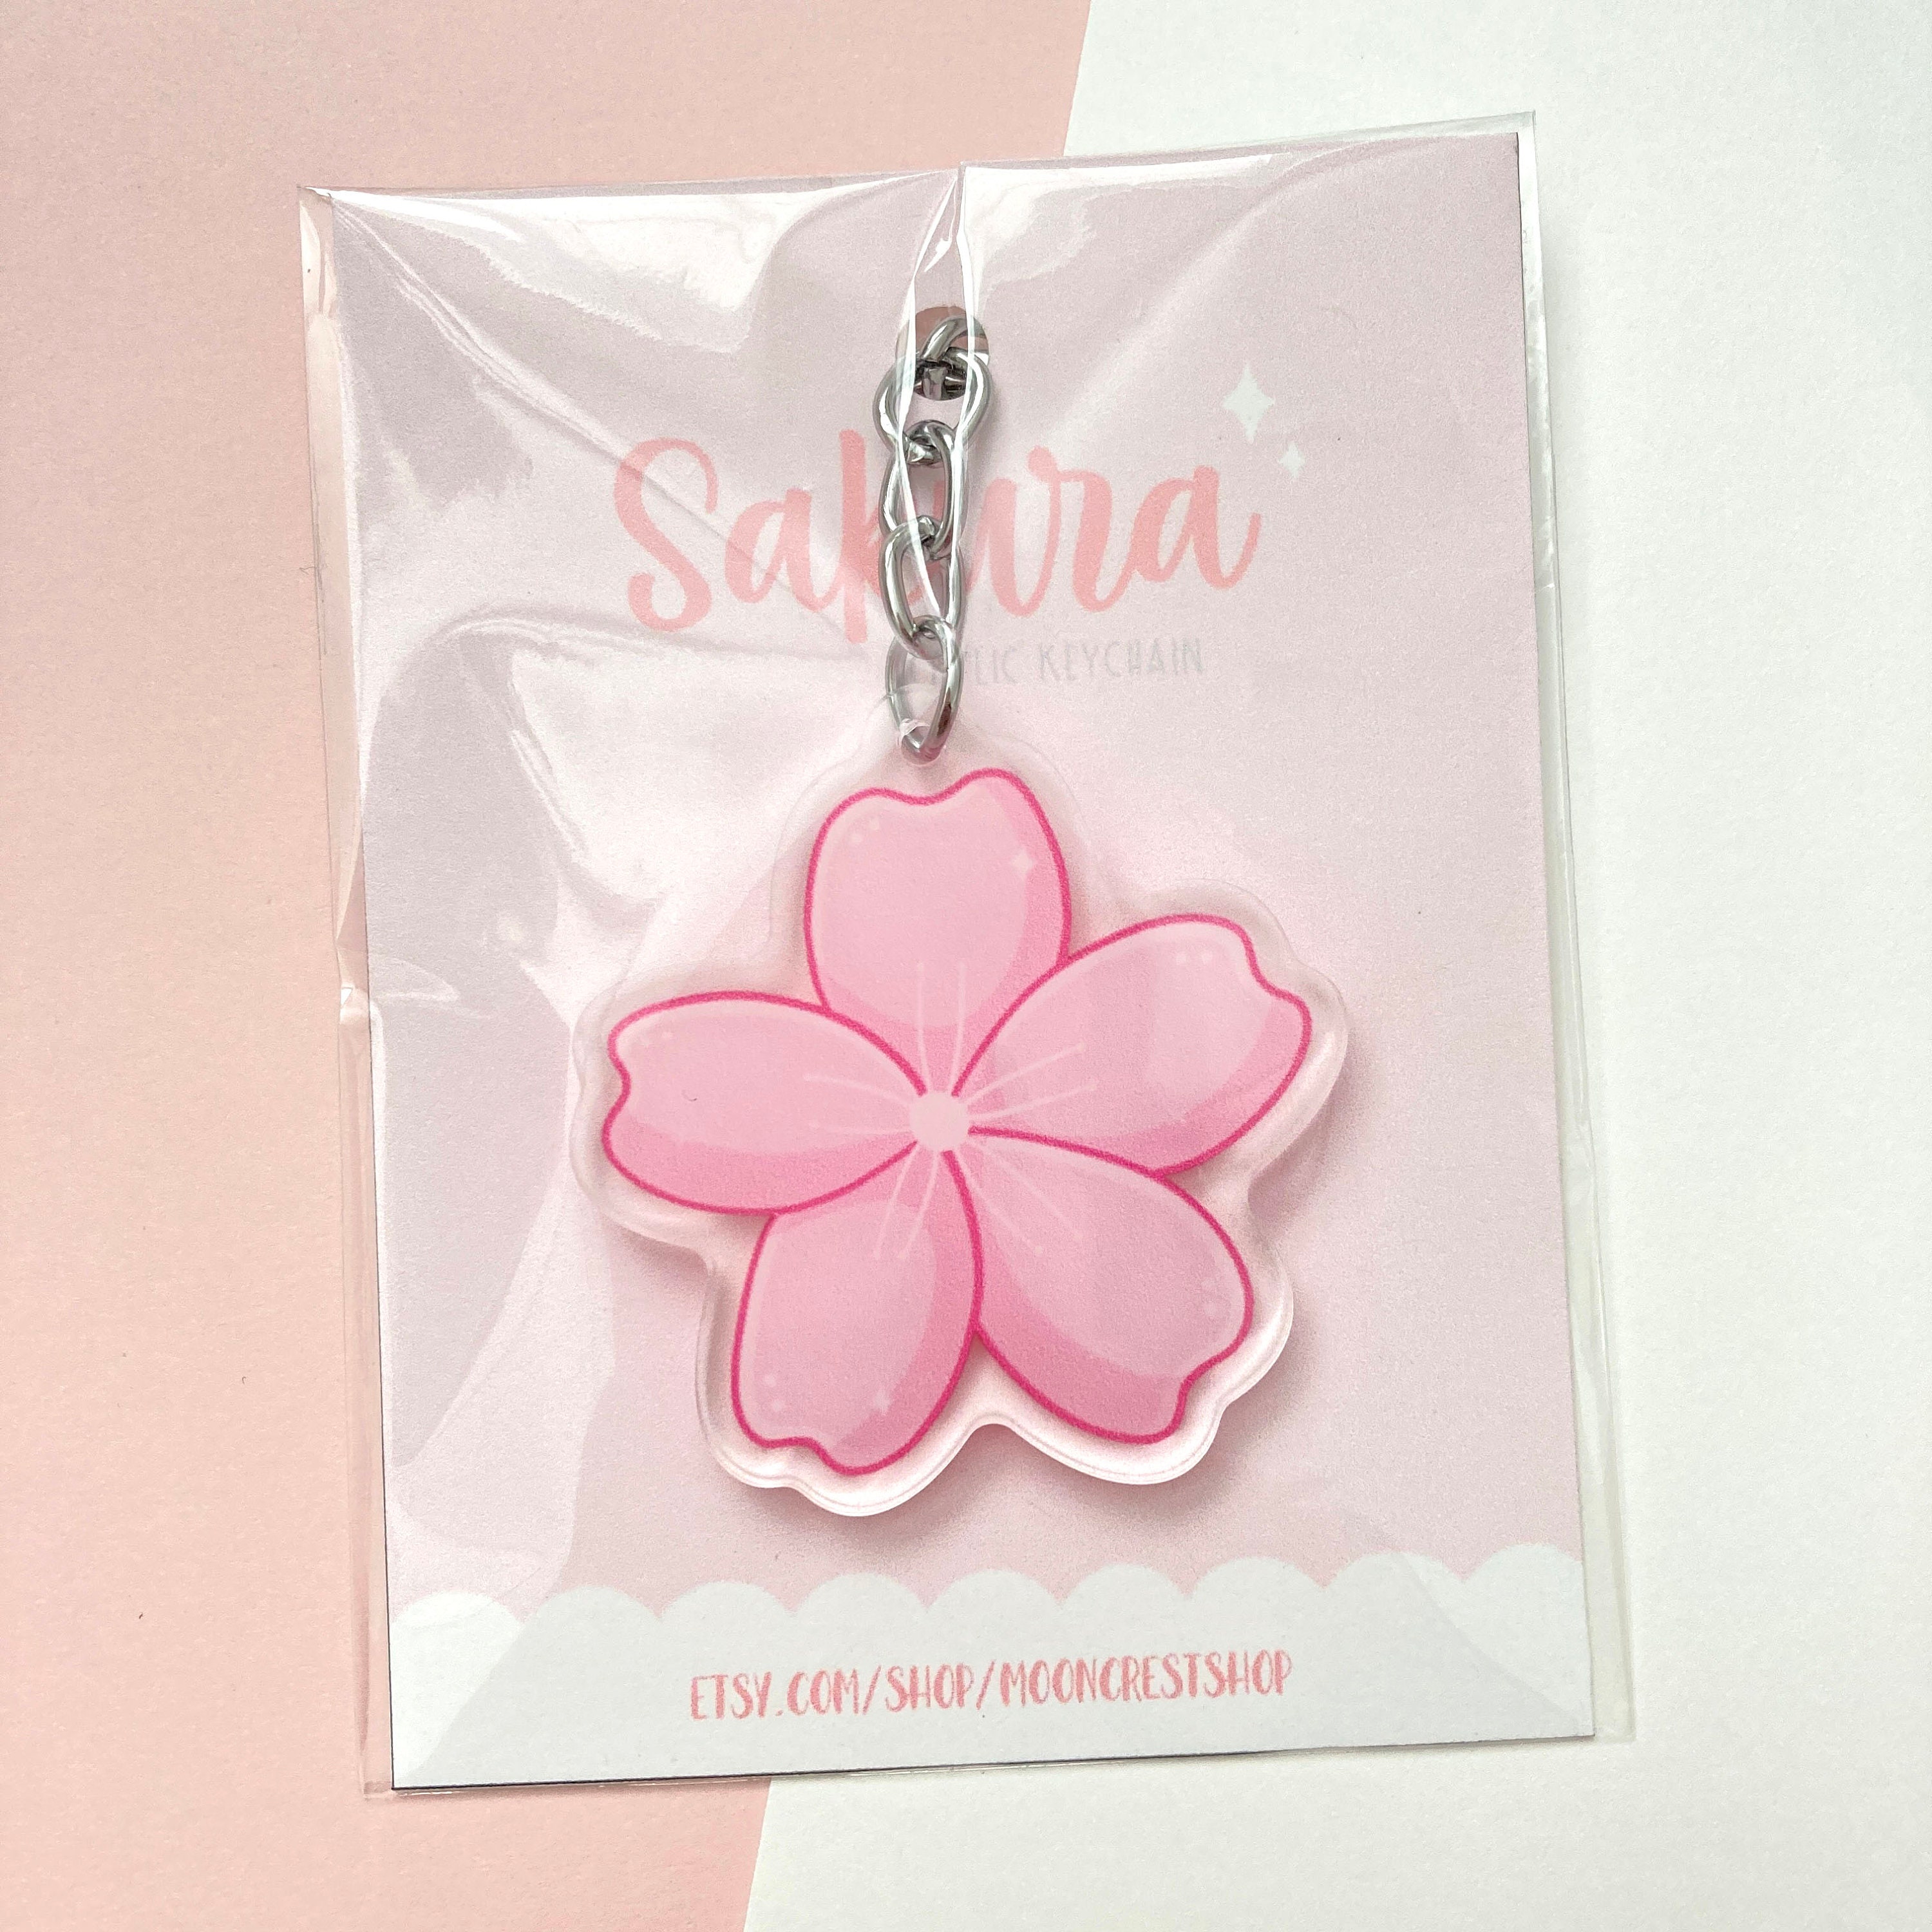 Floral Cherry Blossoms Pink Silver Monogram Keychain